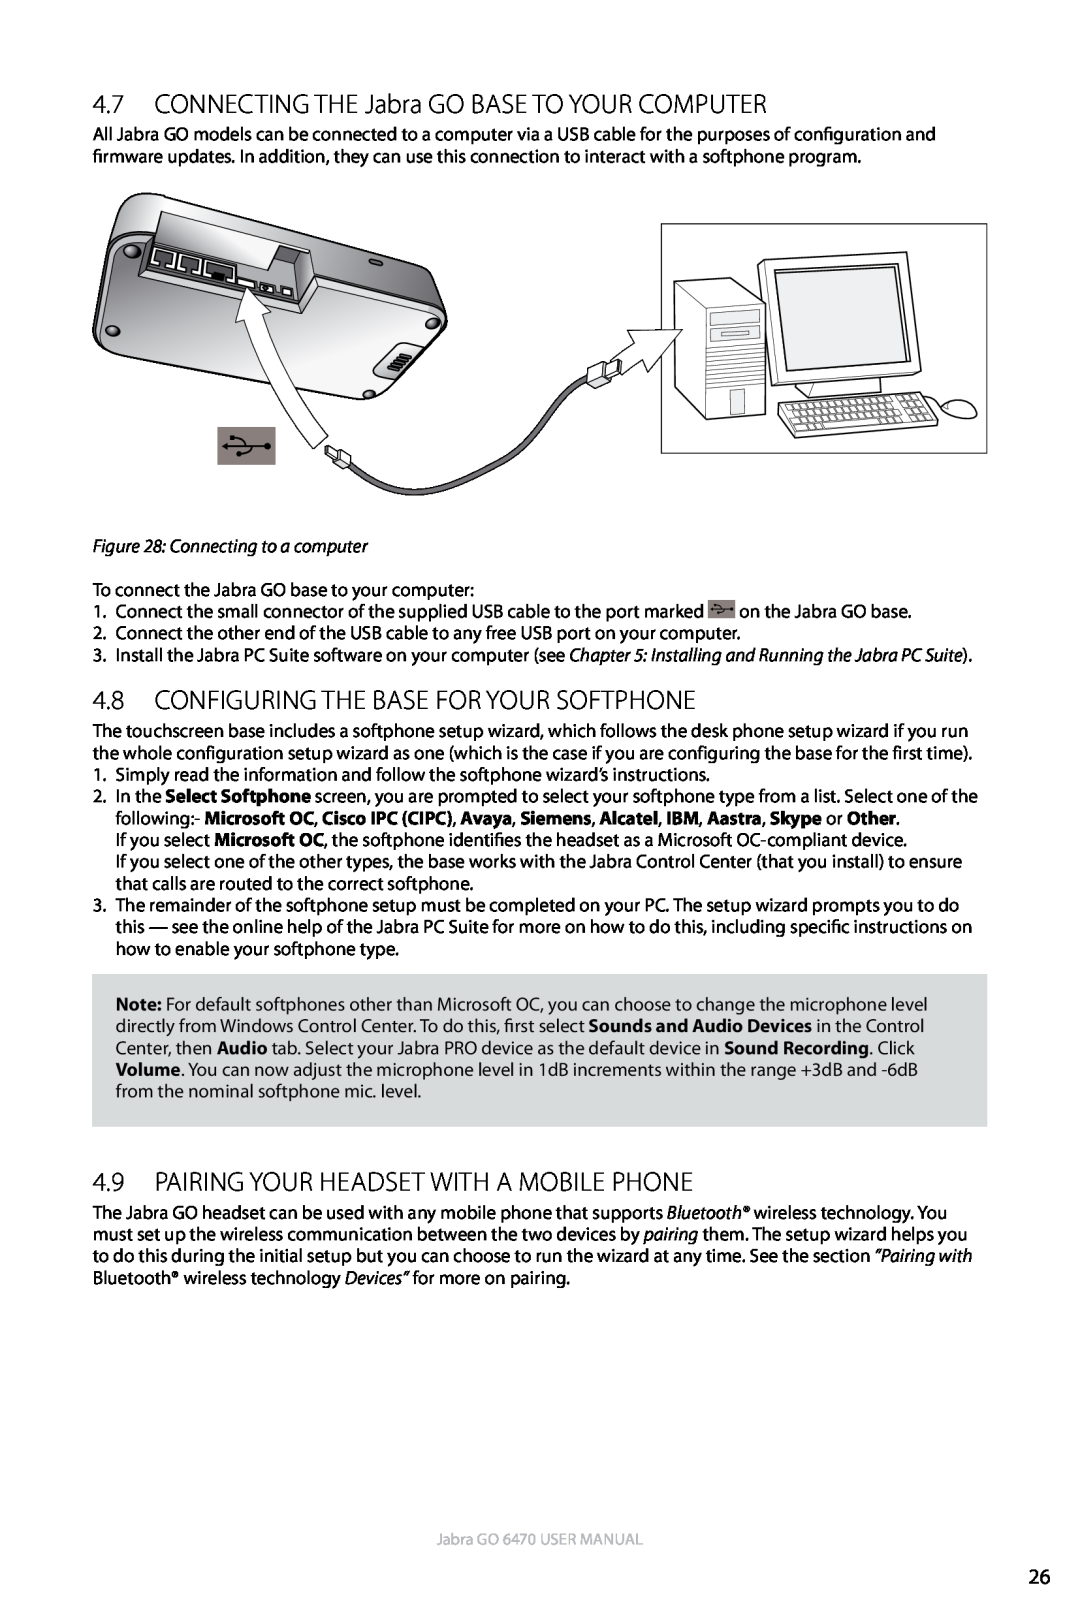 Jabra GO 6470 user manual 4.7Connecting the Jabra GO Base to Your Computer, 4.8Configuring the base for your softphone 